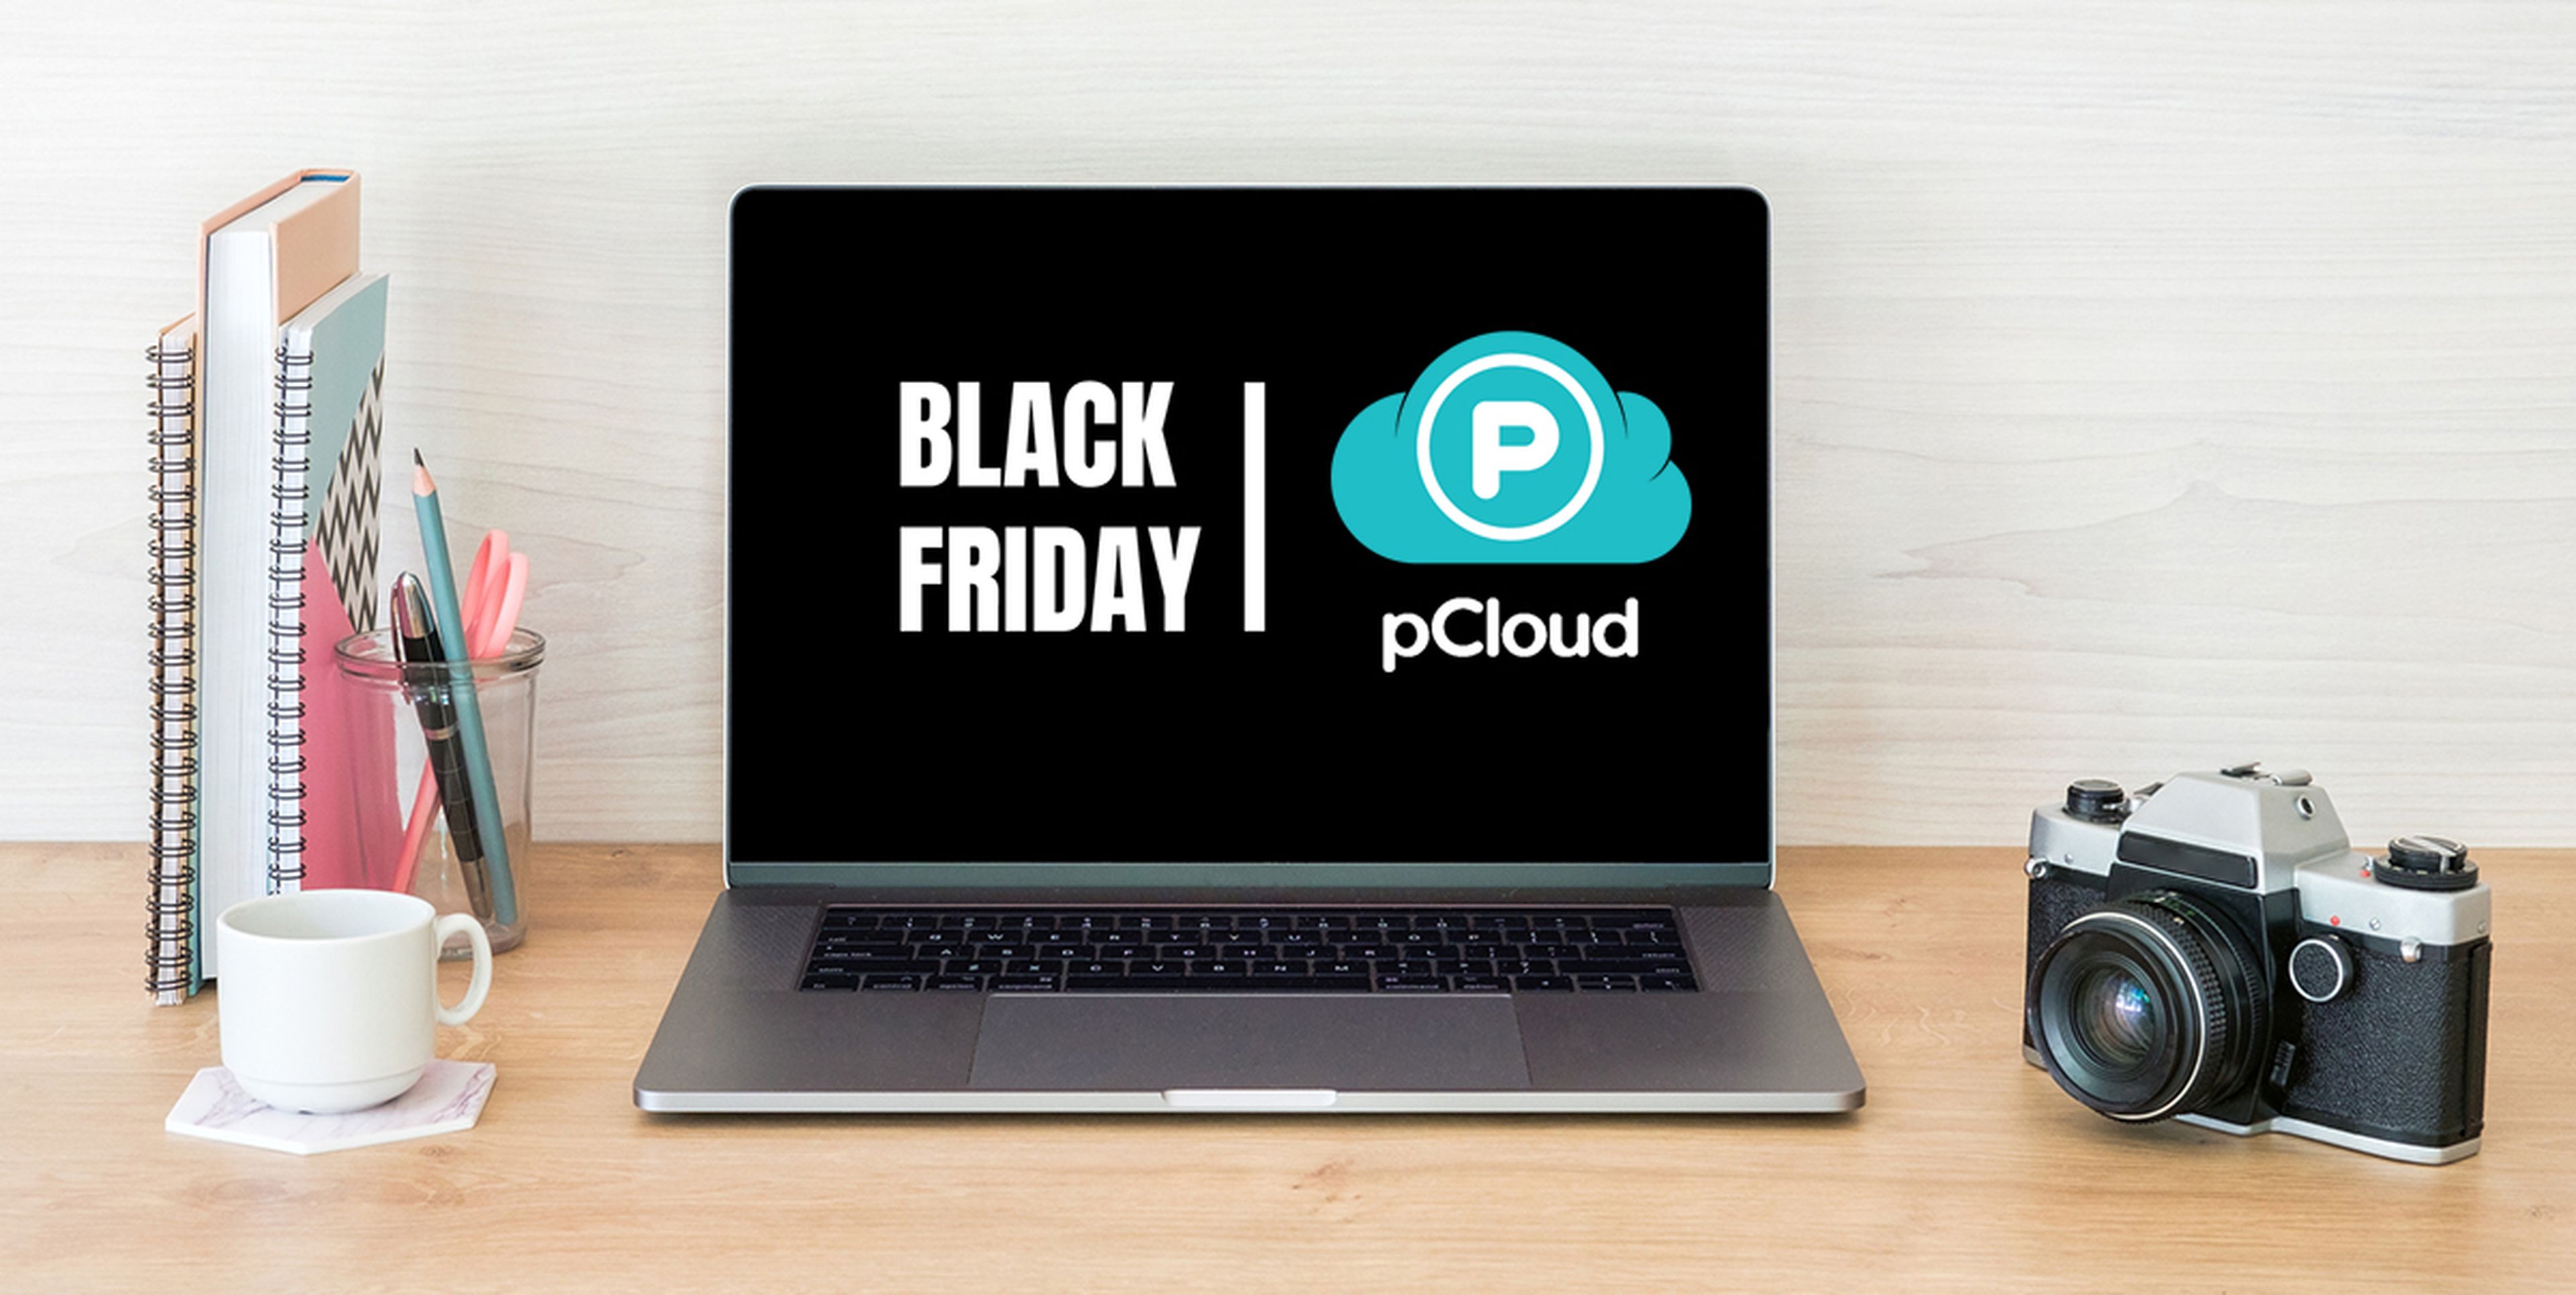 Black Friday pCloud